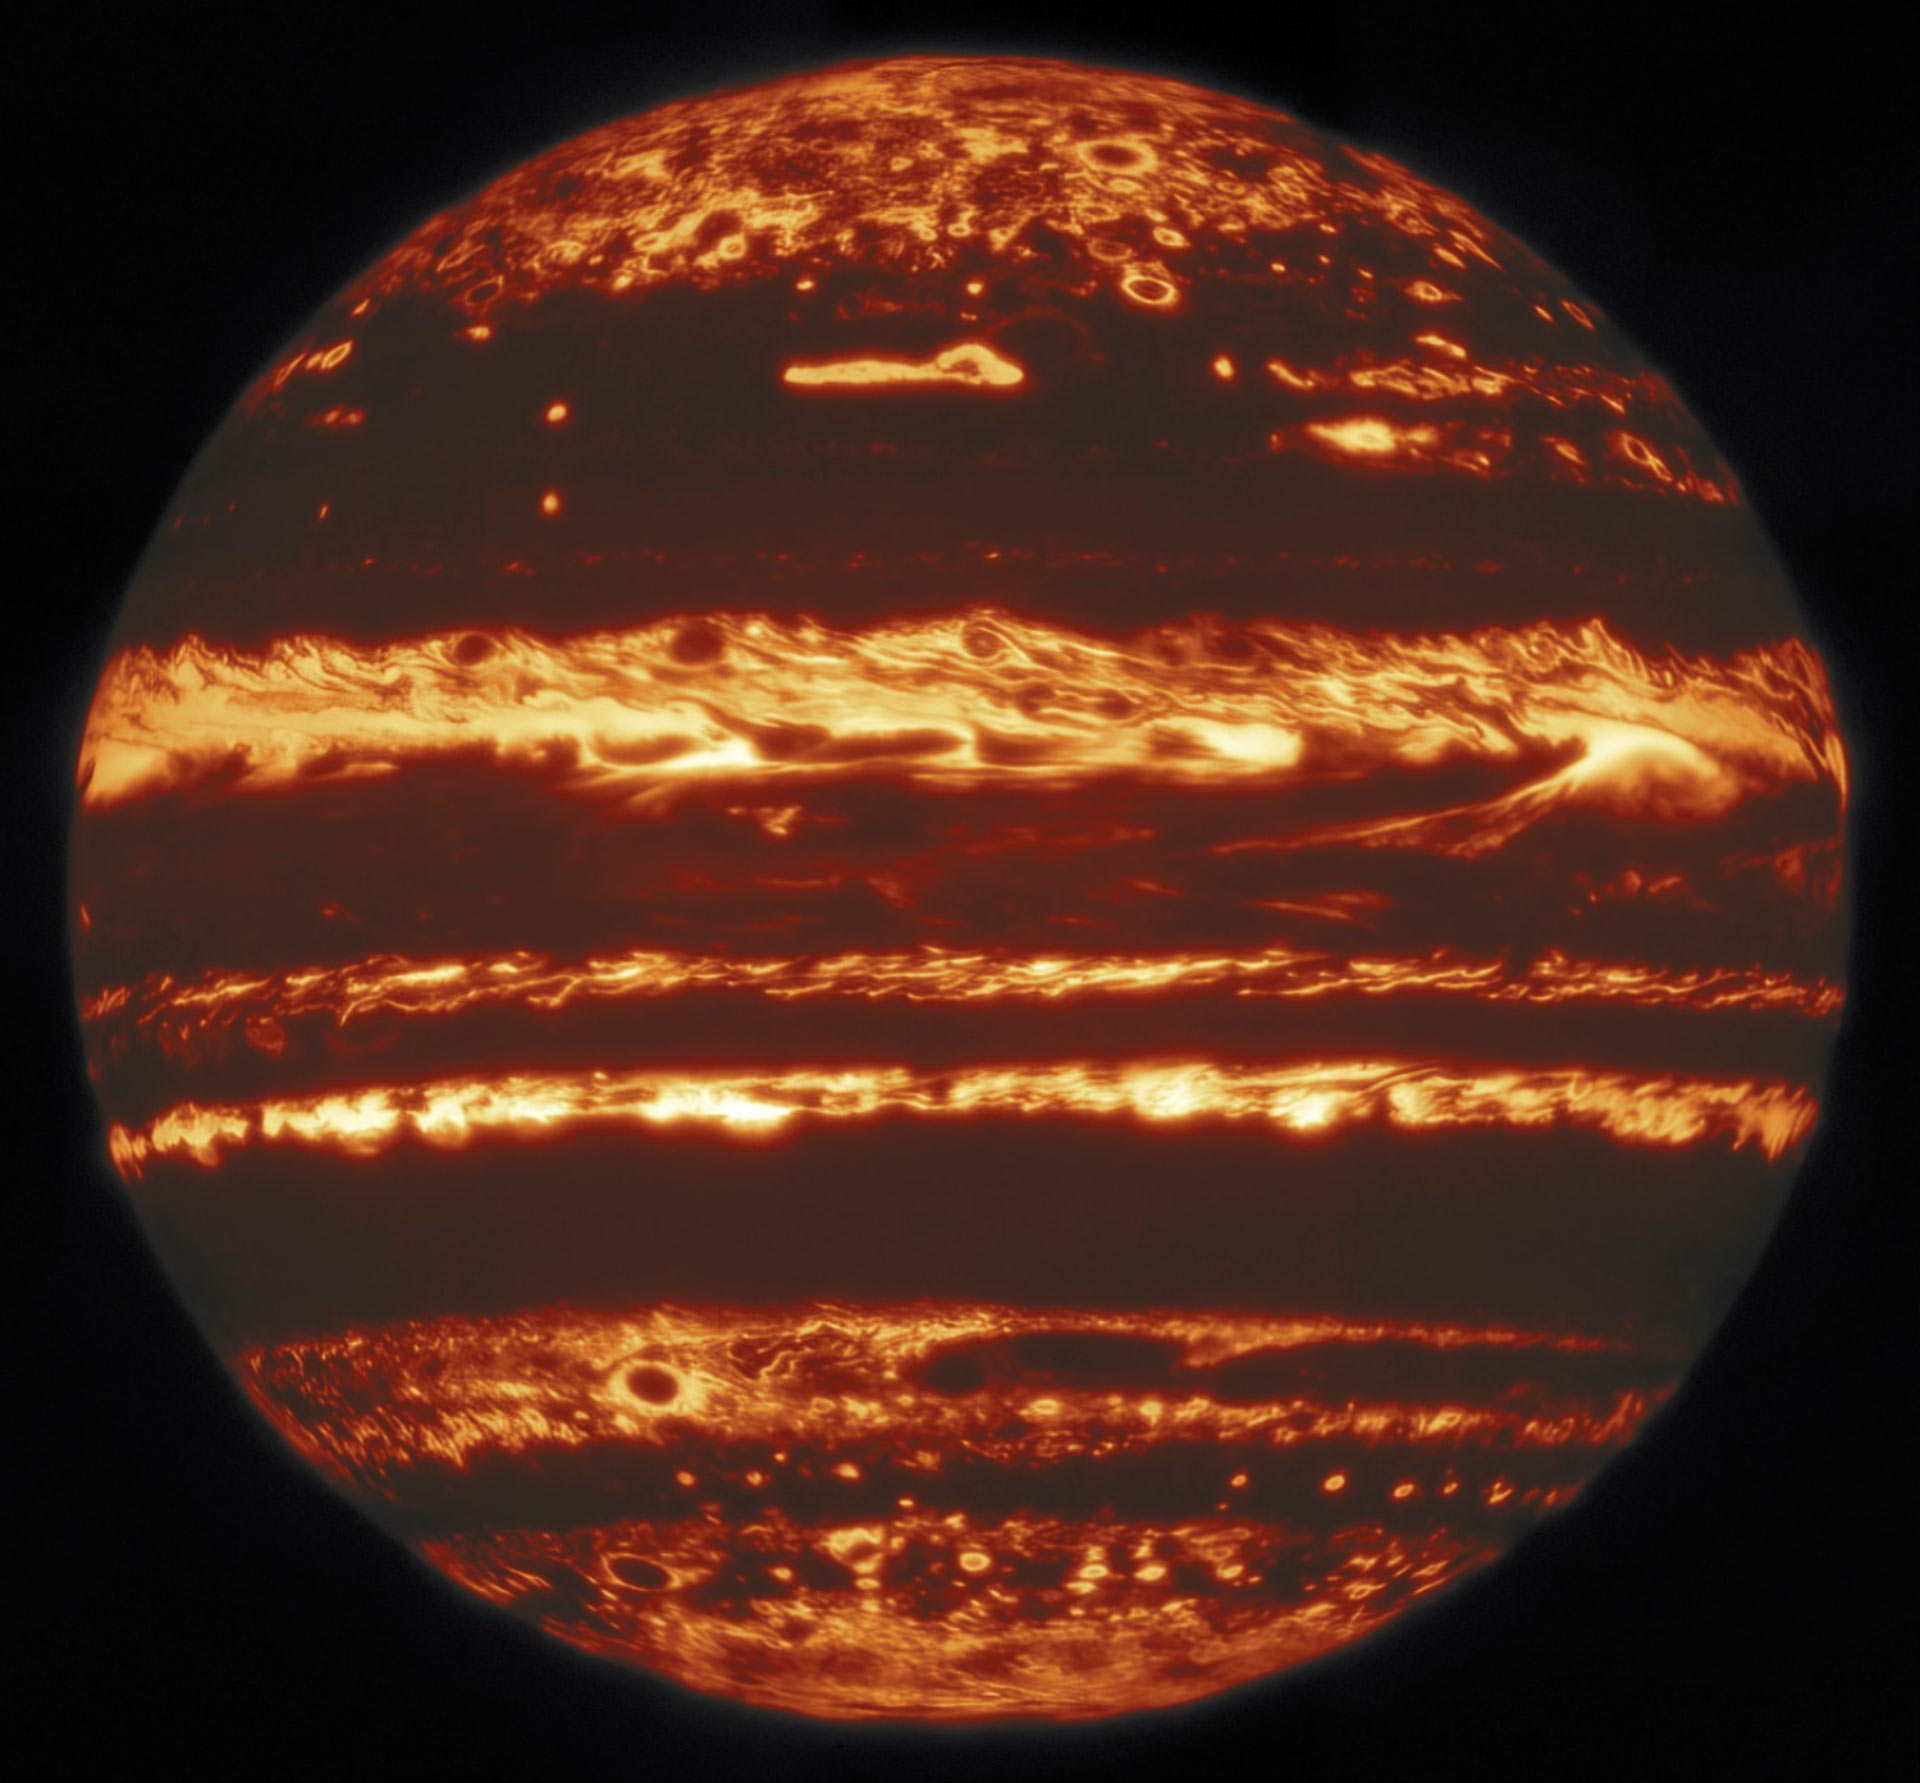 Check out the most accurate picture of Jupiter